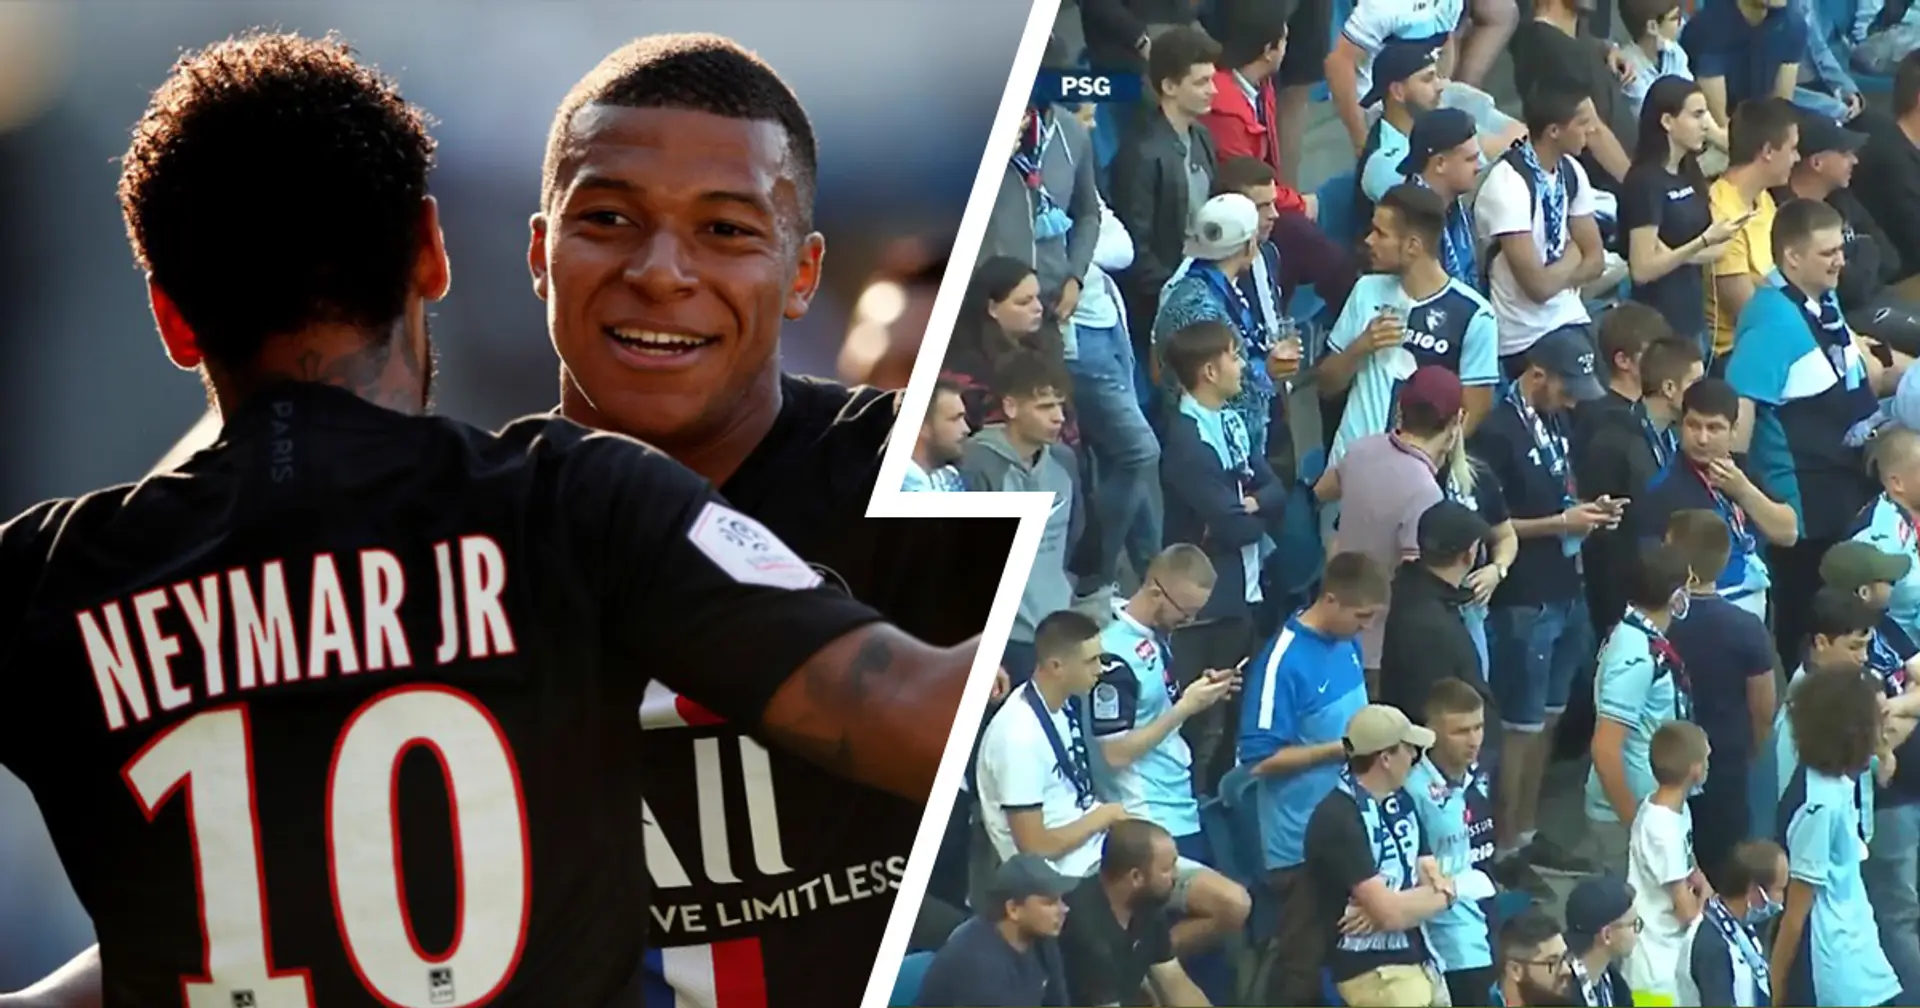 Back with a bang: PSG destroy Le Havre 9-0 in first friendly game in front of fans